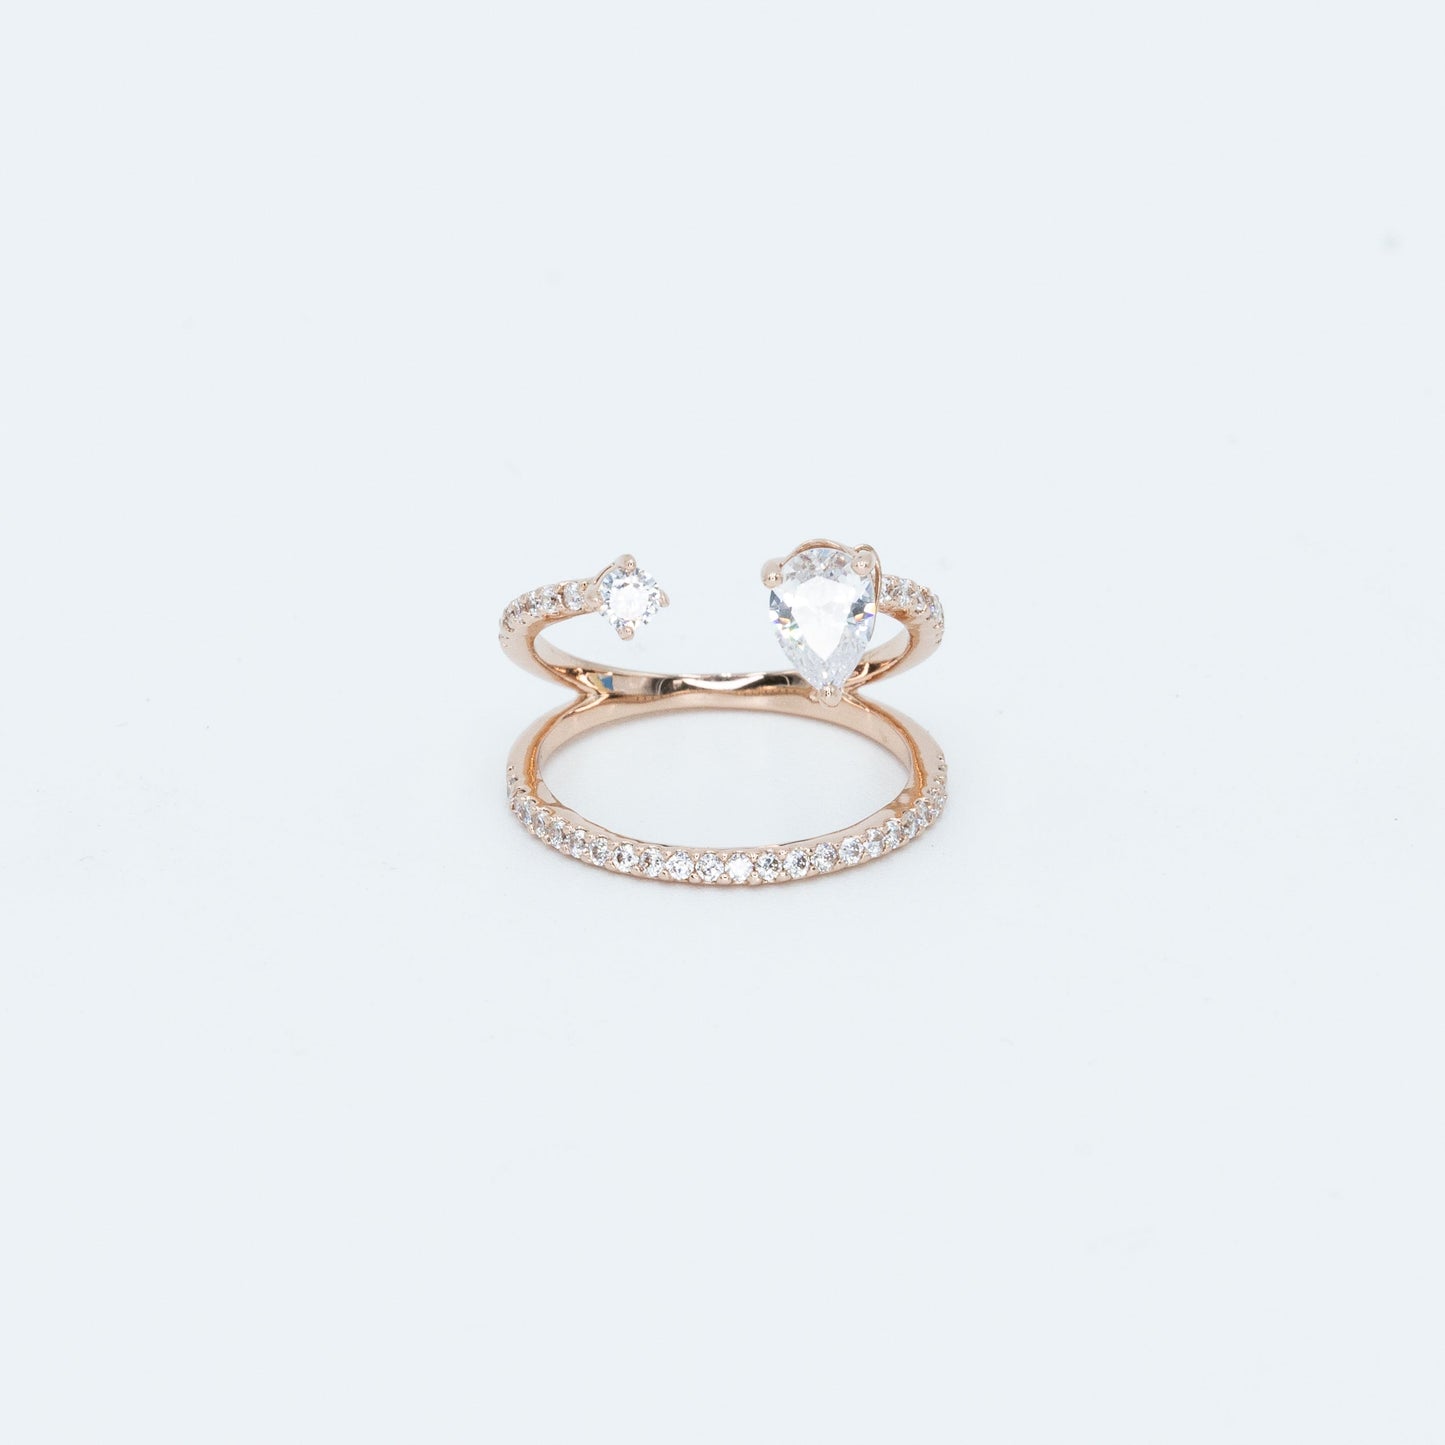 The Double Stone Pave Ring